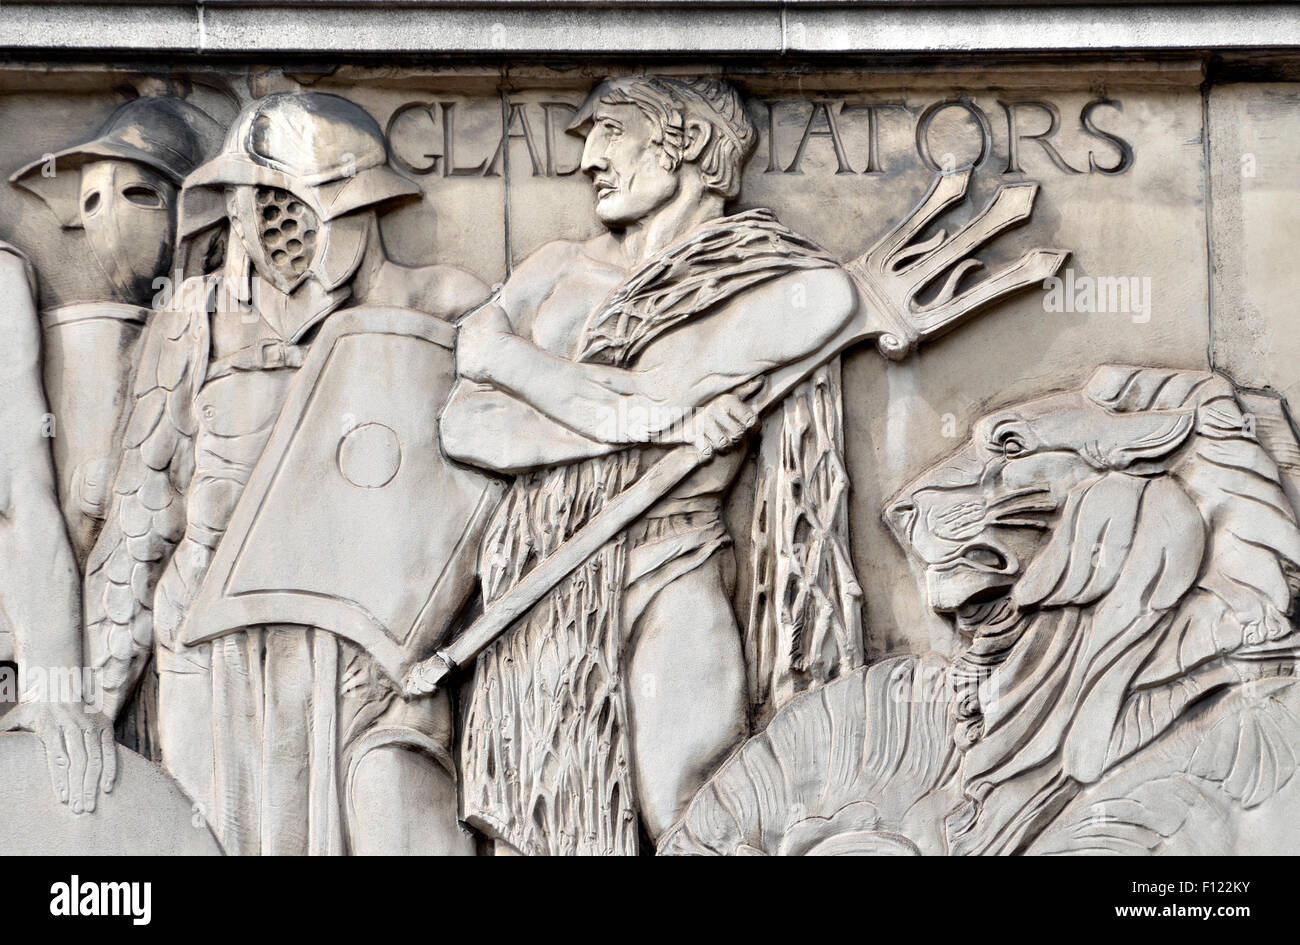 London, England, UK. Frieze on outside wall of the Saville Theatre (by Gilbert Bayes, 1931) Gladiators Stock Photo